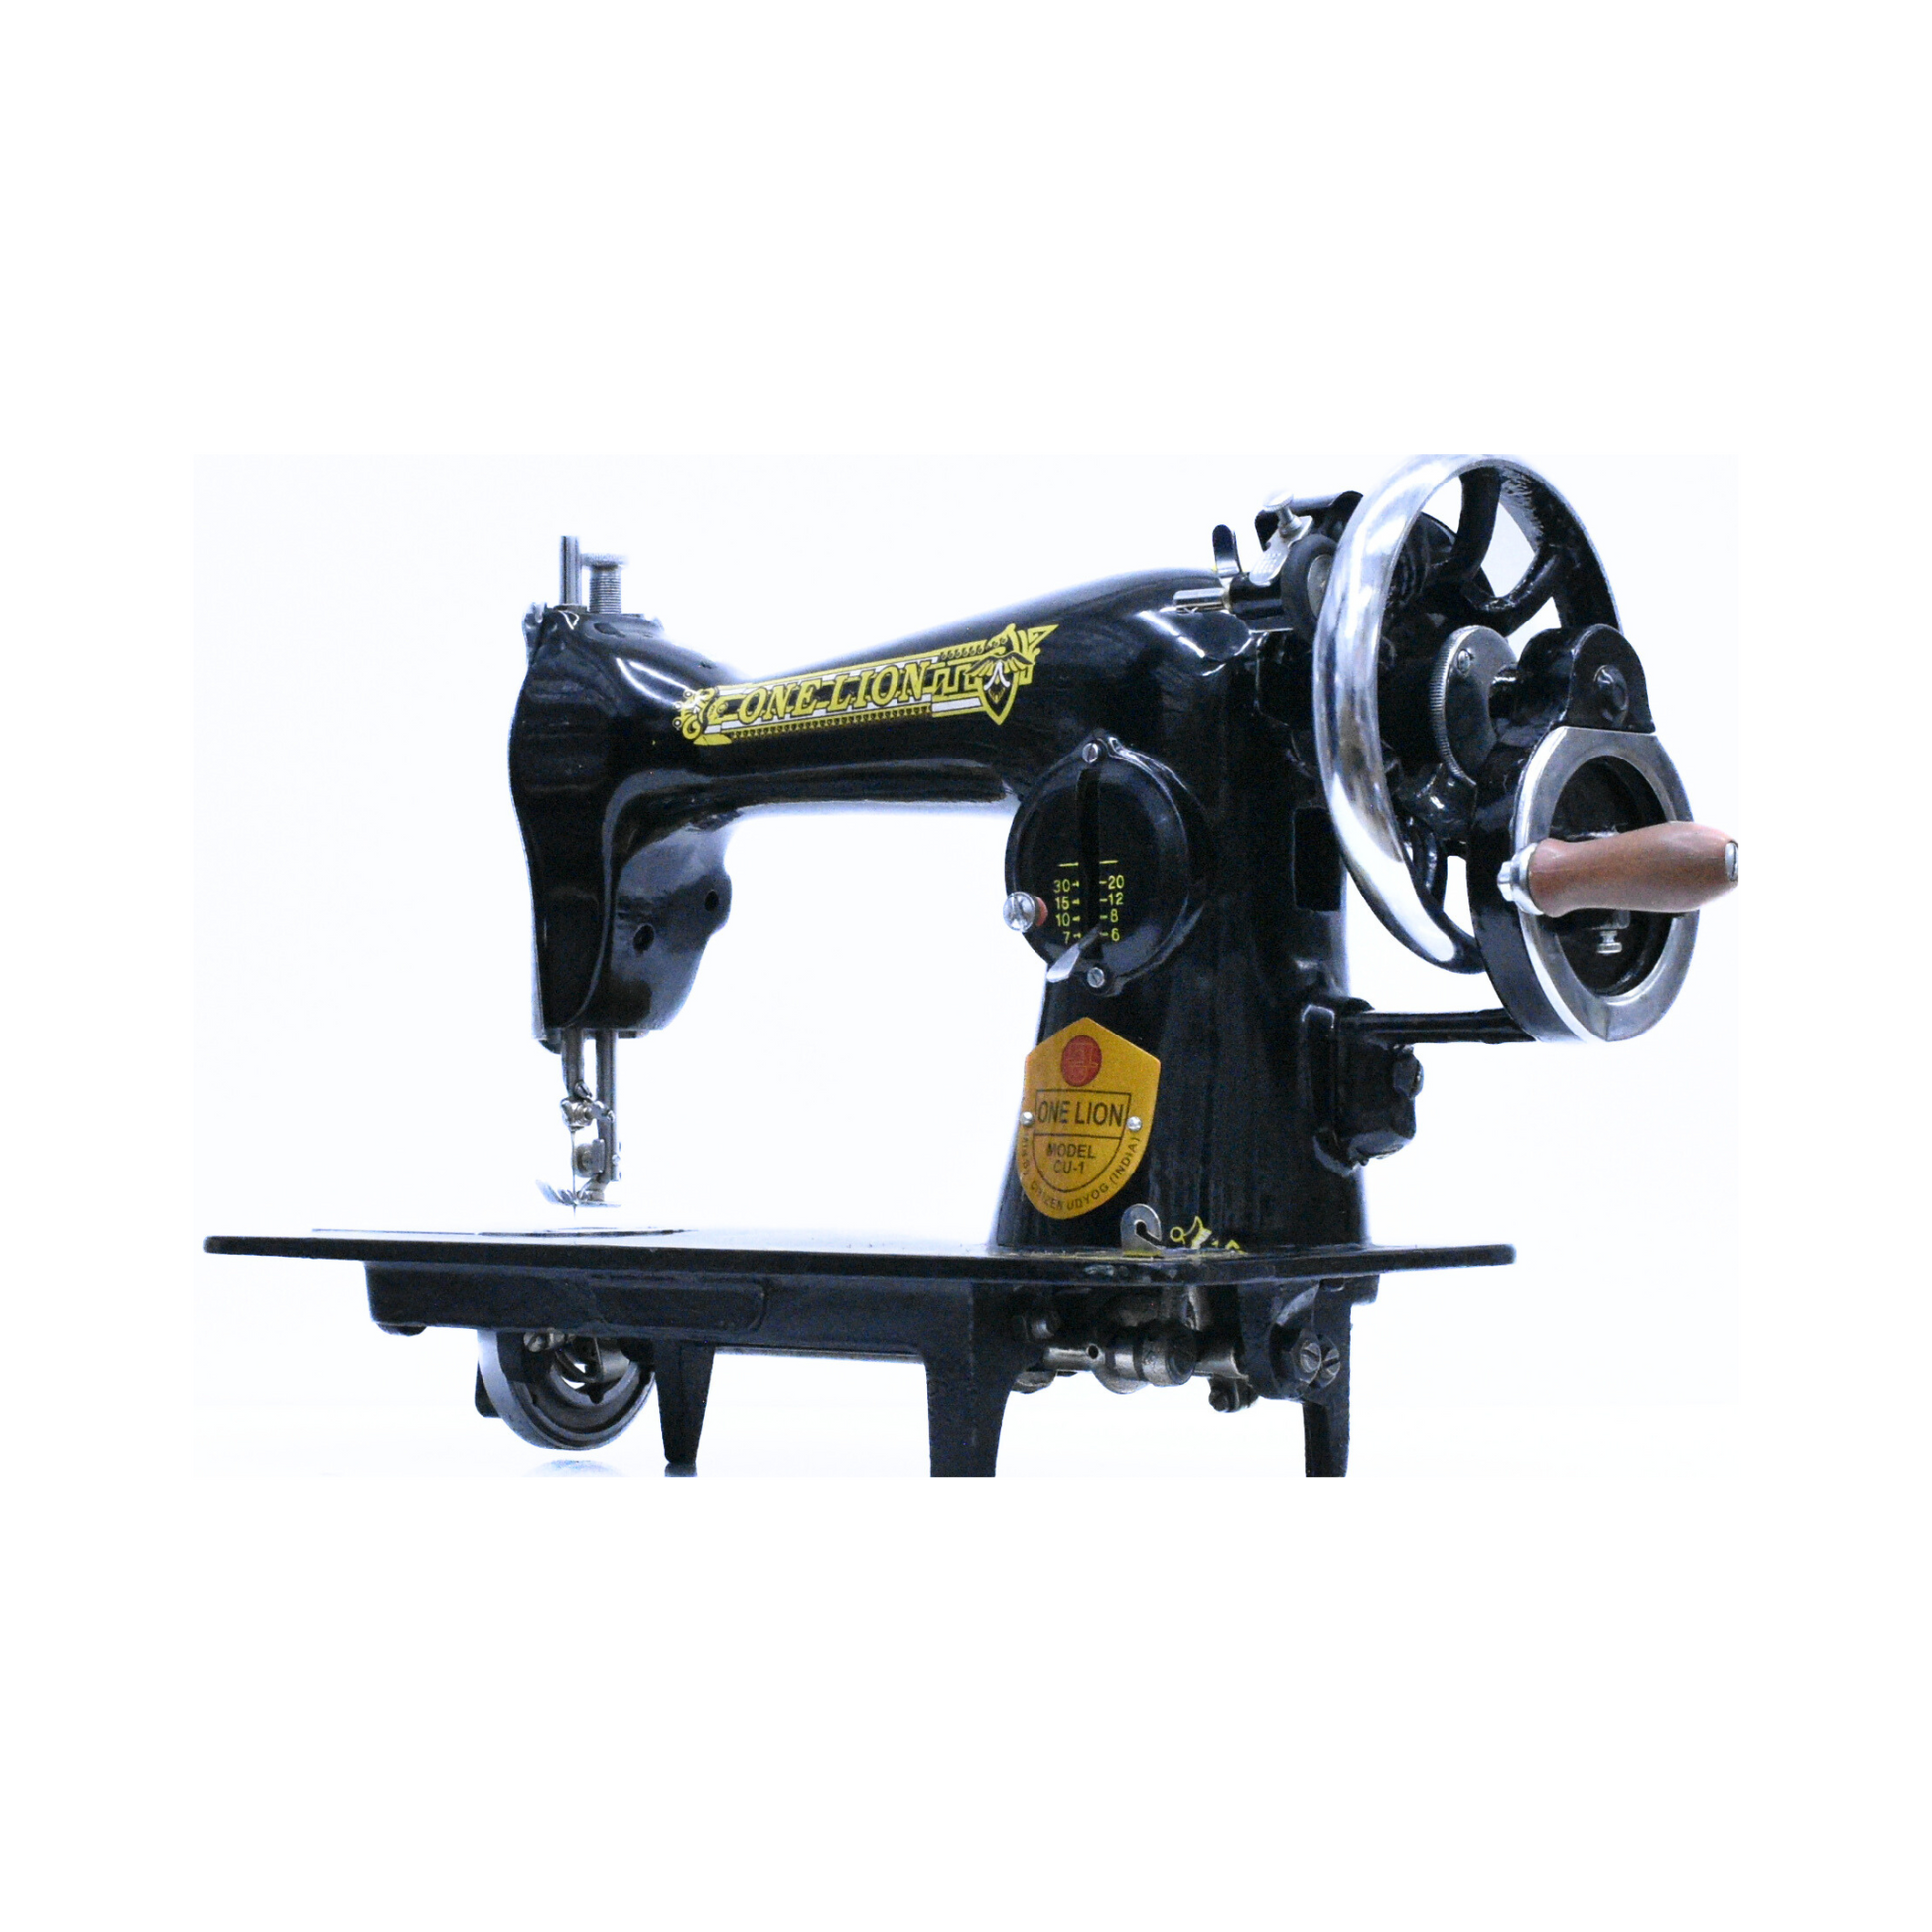 One lion - Vintage sewing machine - Black - Side view